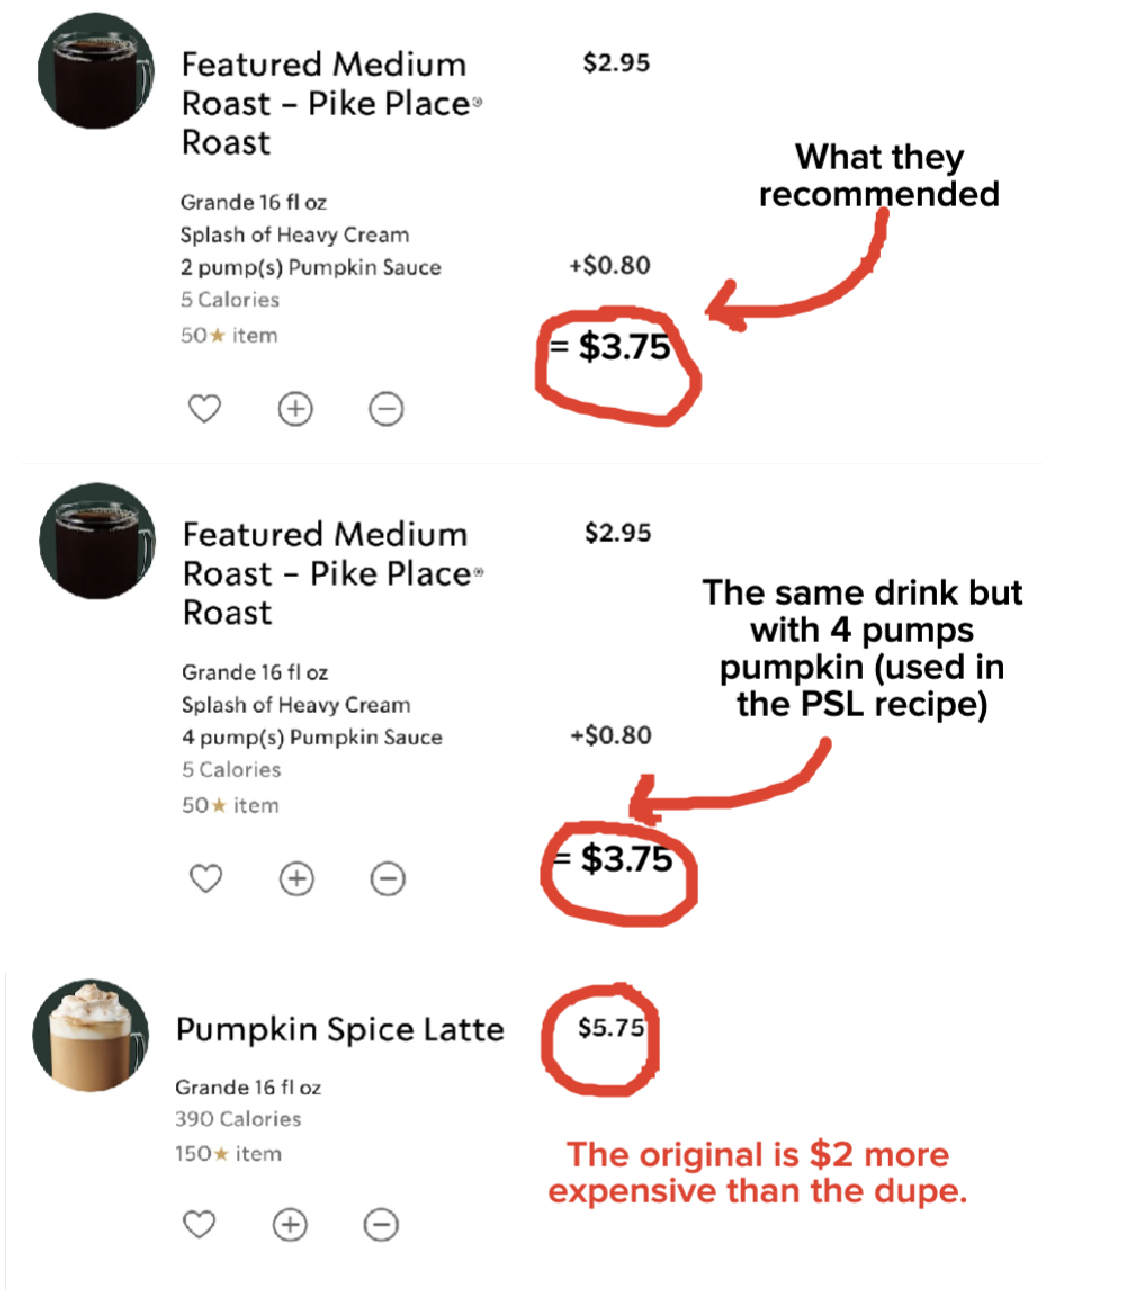 the price difference